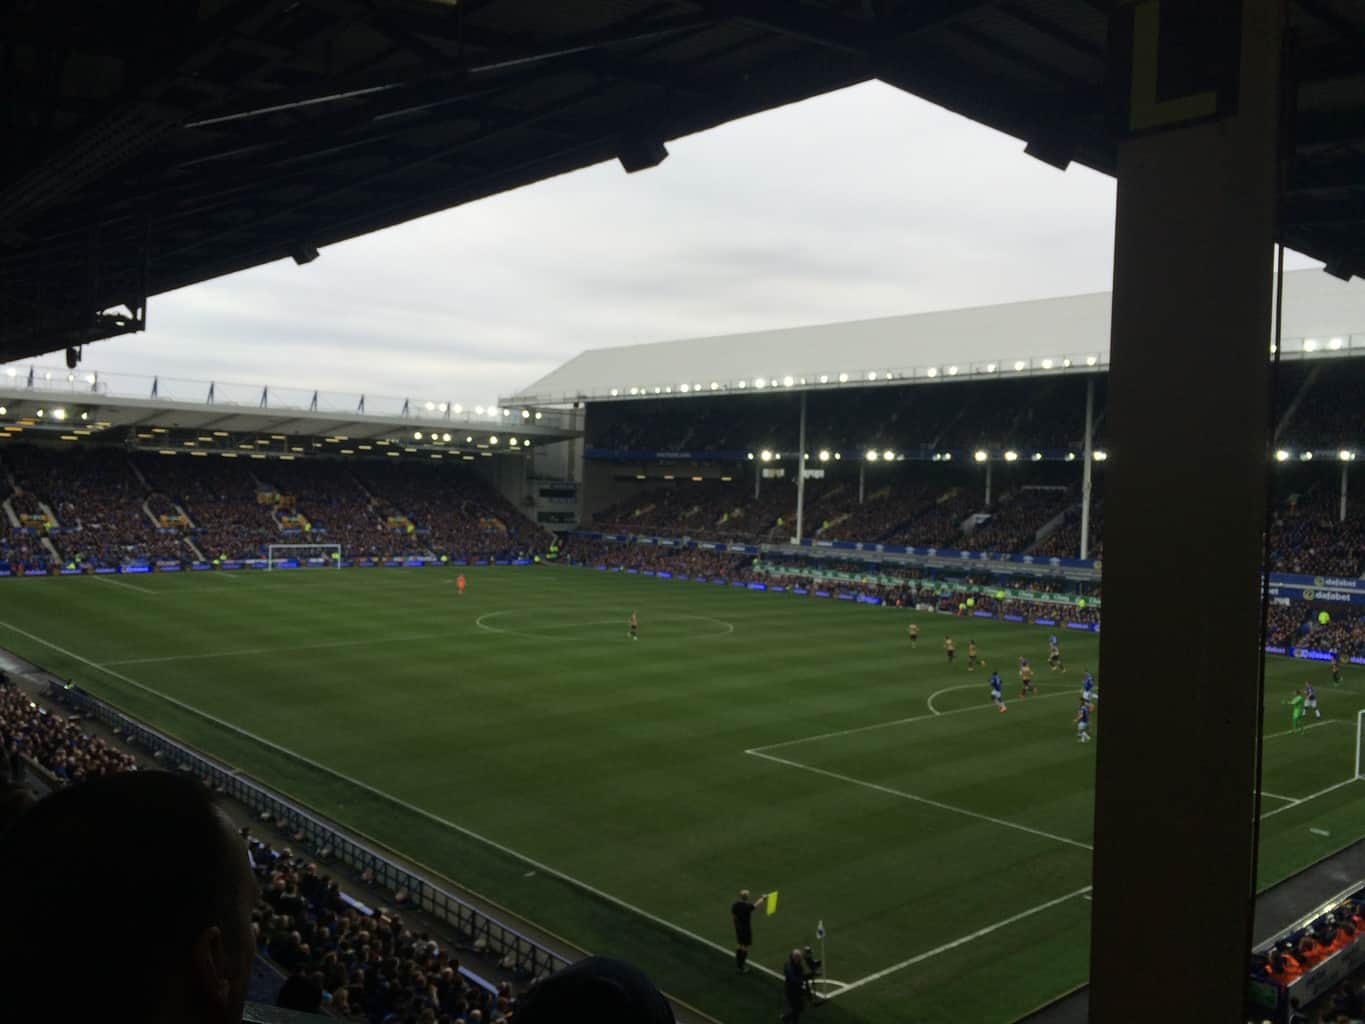 view of the Premier League field at Goodison Park